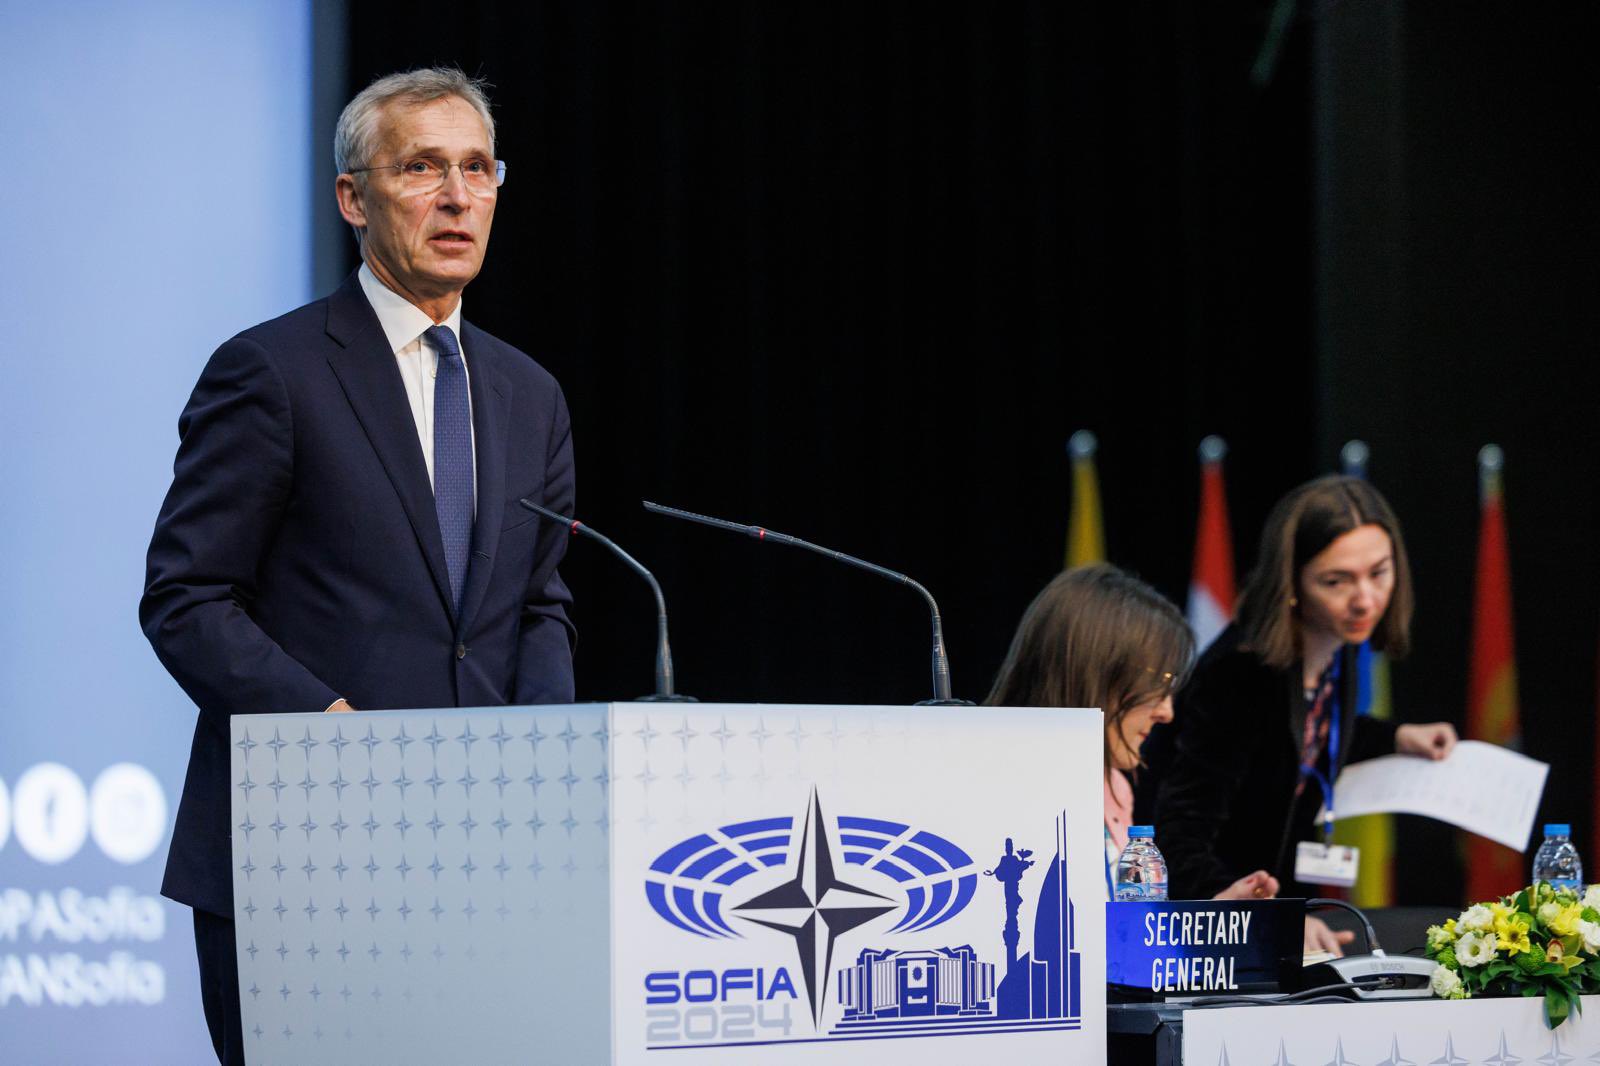 NATO holds consultations on putting nuclear weapons on alert